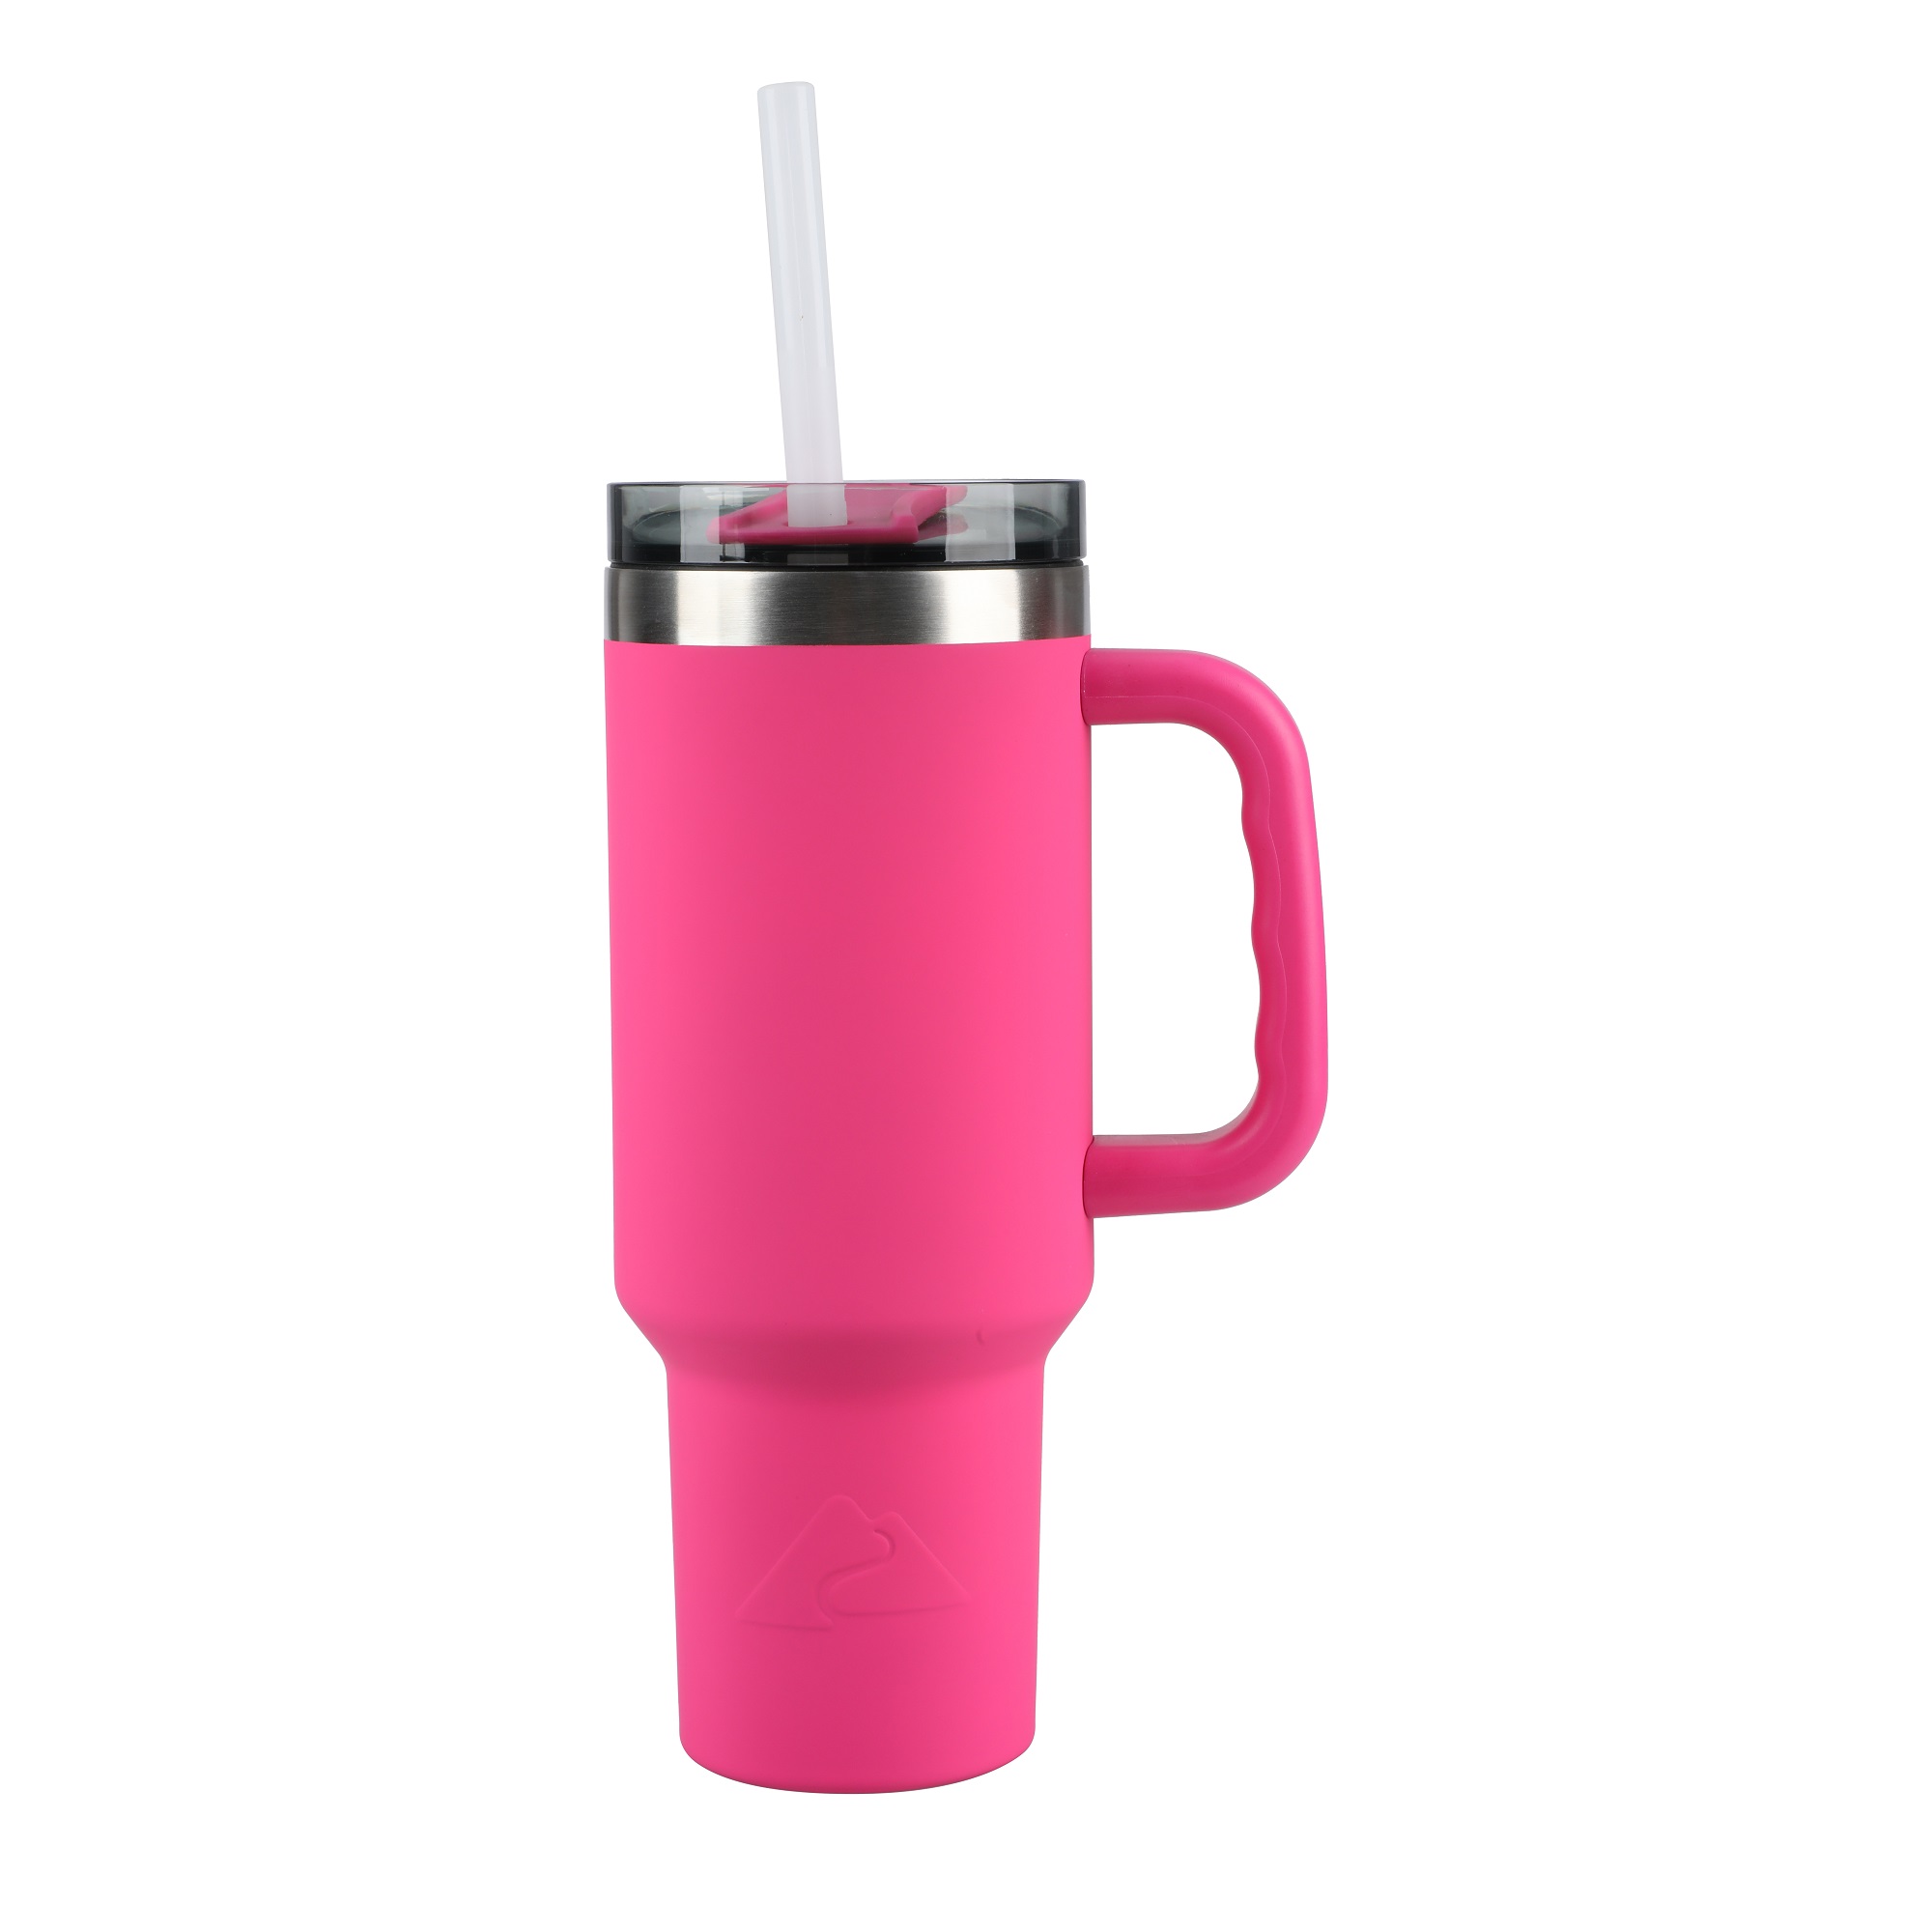 Ozark Trail 40 oz Vacuum Insulated Stainless Steel Tumbler Hot Pink - image 5 of 9